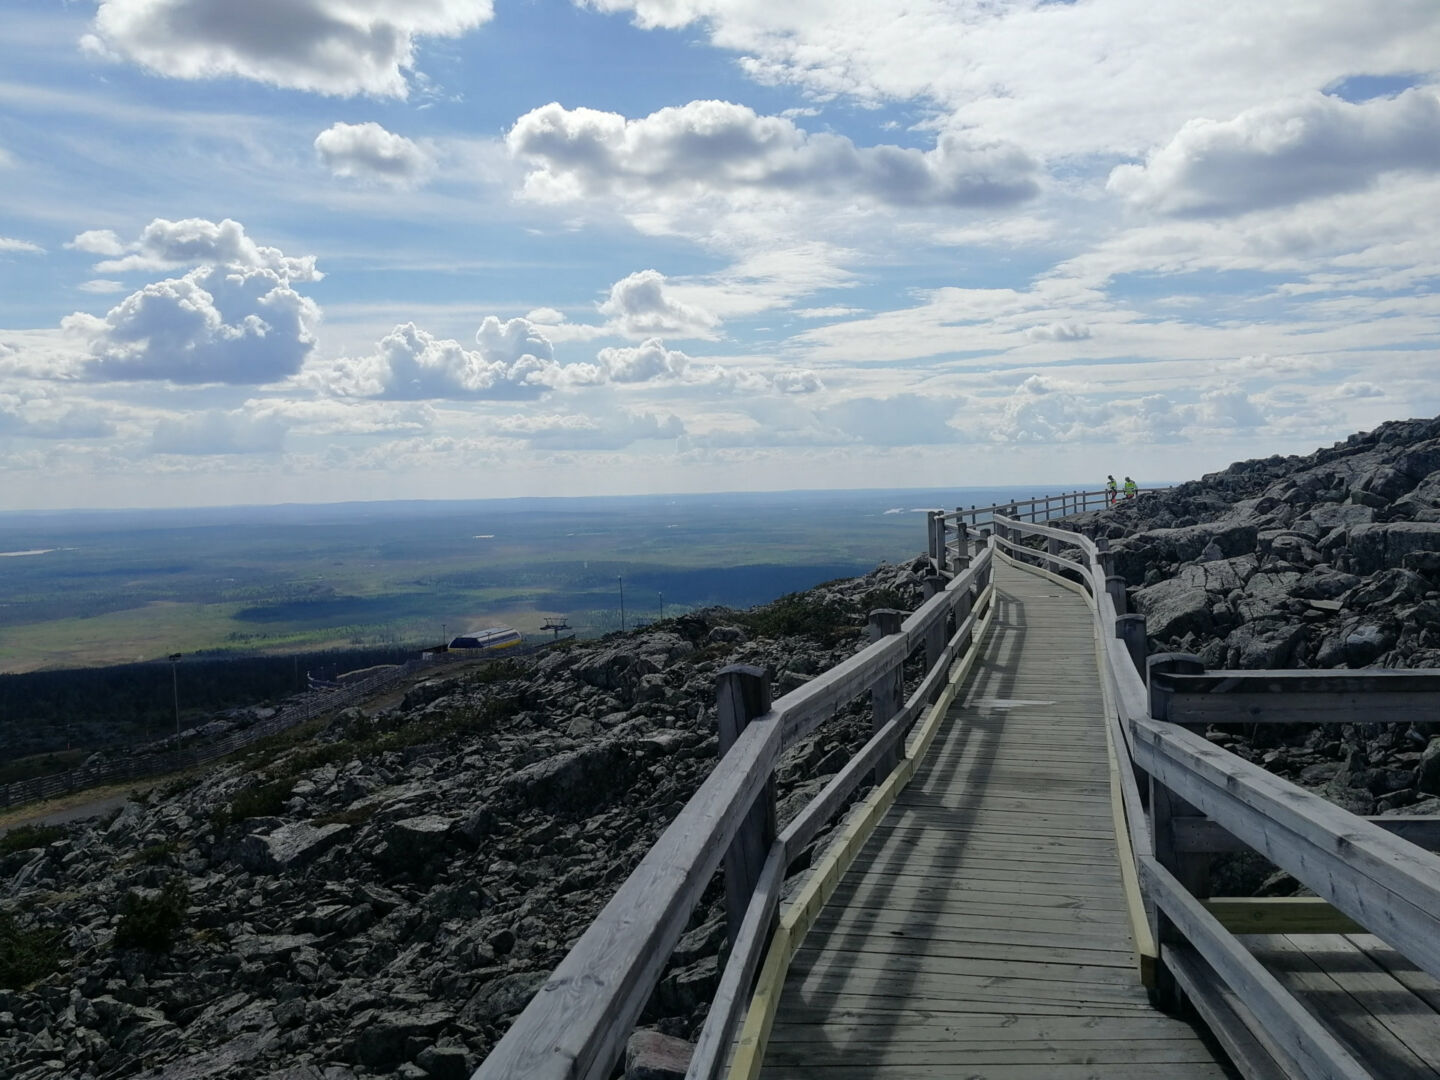 The walkway over a stone field in Levi (Kittilä), a Lapland filming location